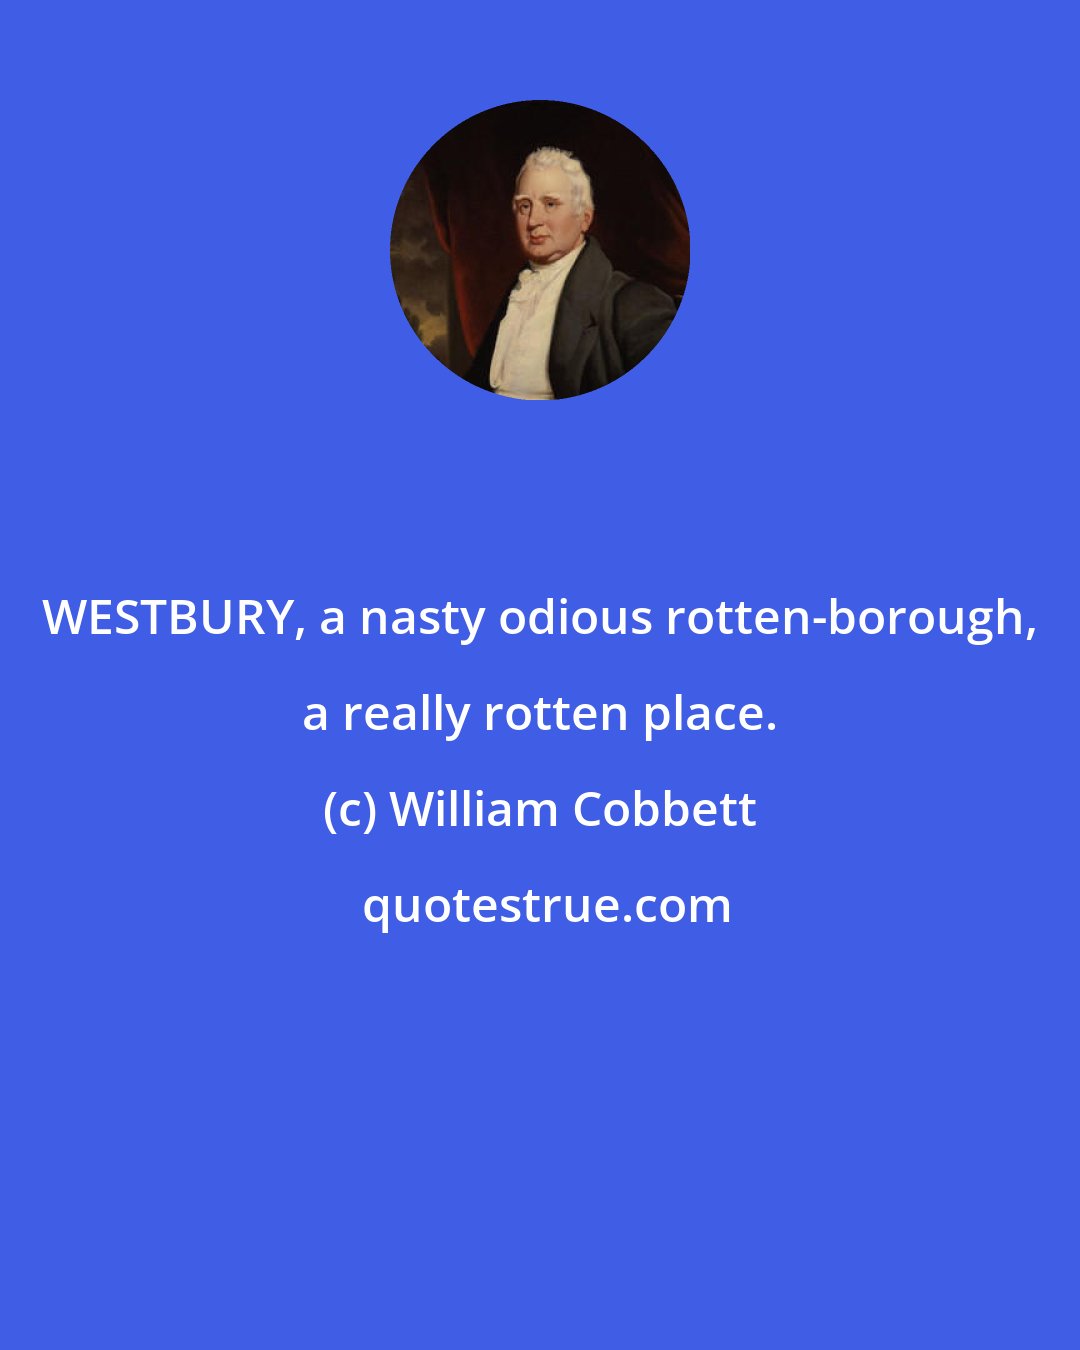 William Cobbett: WESTBURY, a nasty odious rotten-borough, a really rotten place.